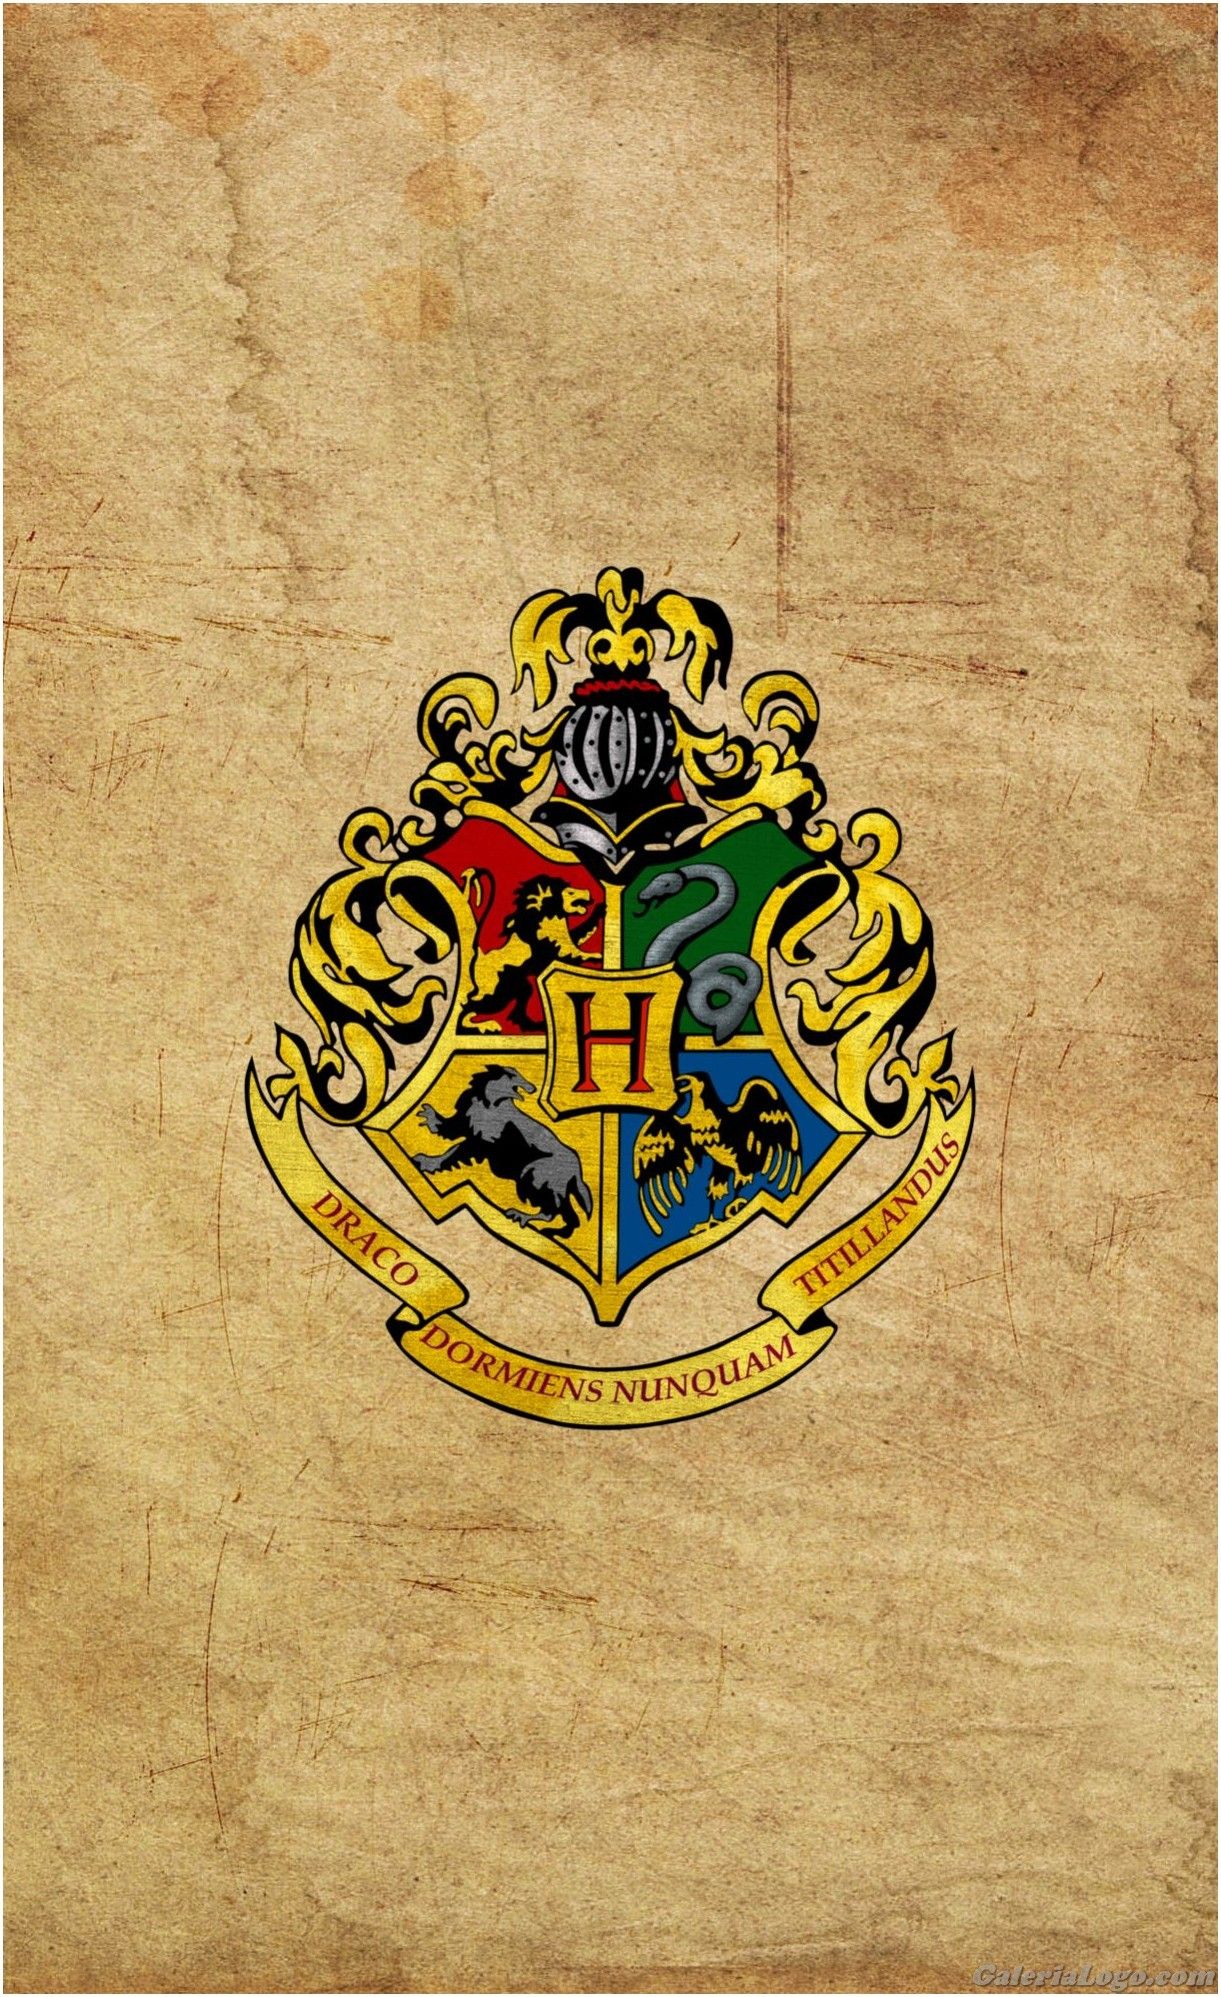 Gryffindor - Desktop Wallpapers, Phone Wallpaper, PFP, Gifs, and More!